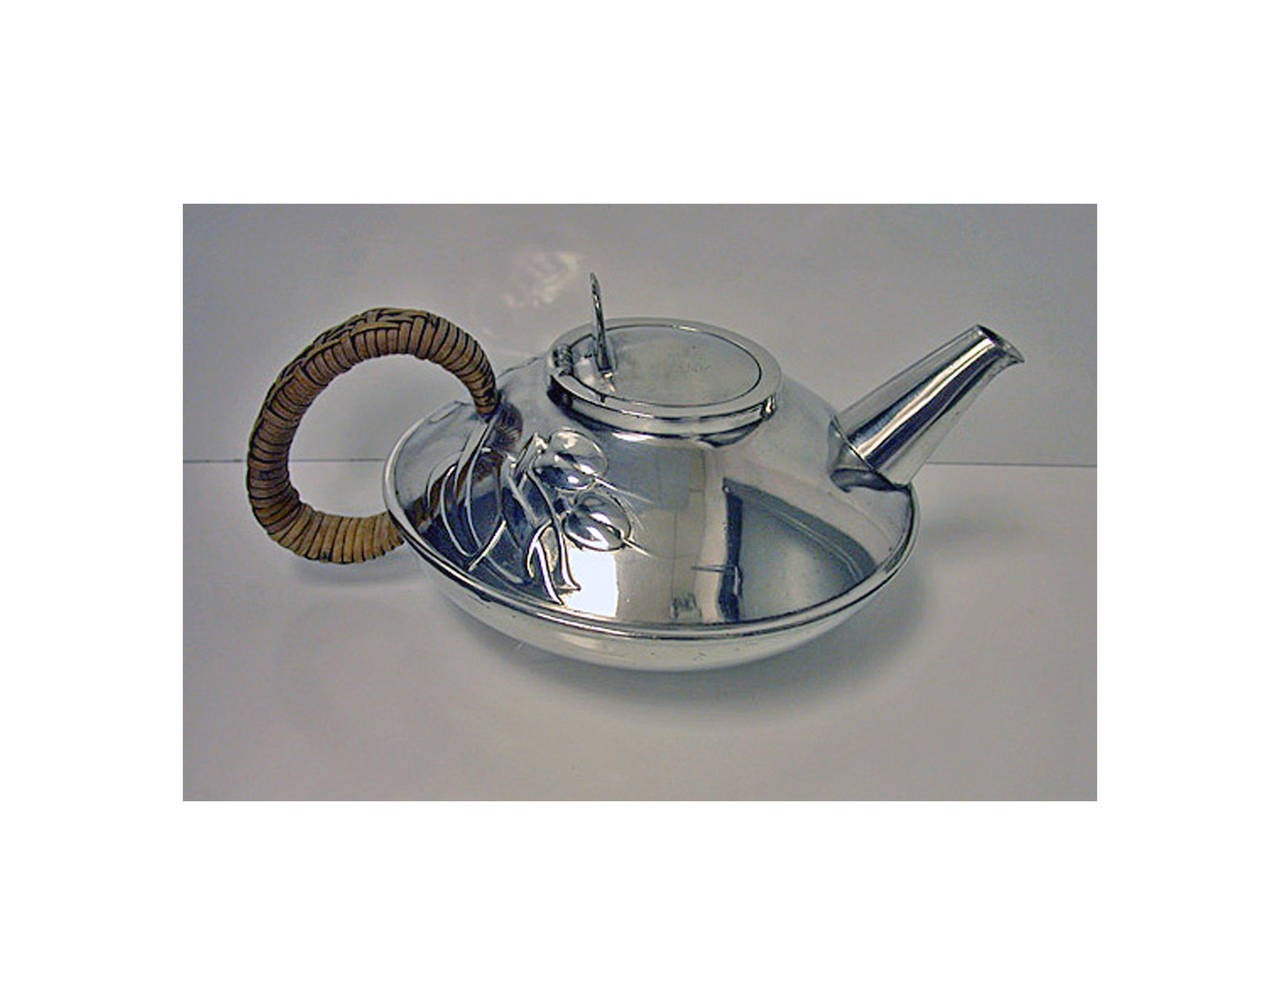 Archibald Knox Liberty Tudric pewter Tea set and Tray, C.1905.Teapot, cream jug, sugar and tray, each with relief whiplash curved celtic ornament interlace decoration, original wicker handle to teapot, together with two handled rectangular tray.